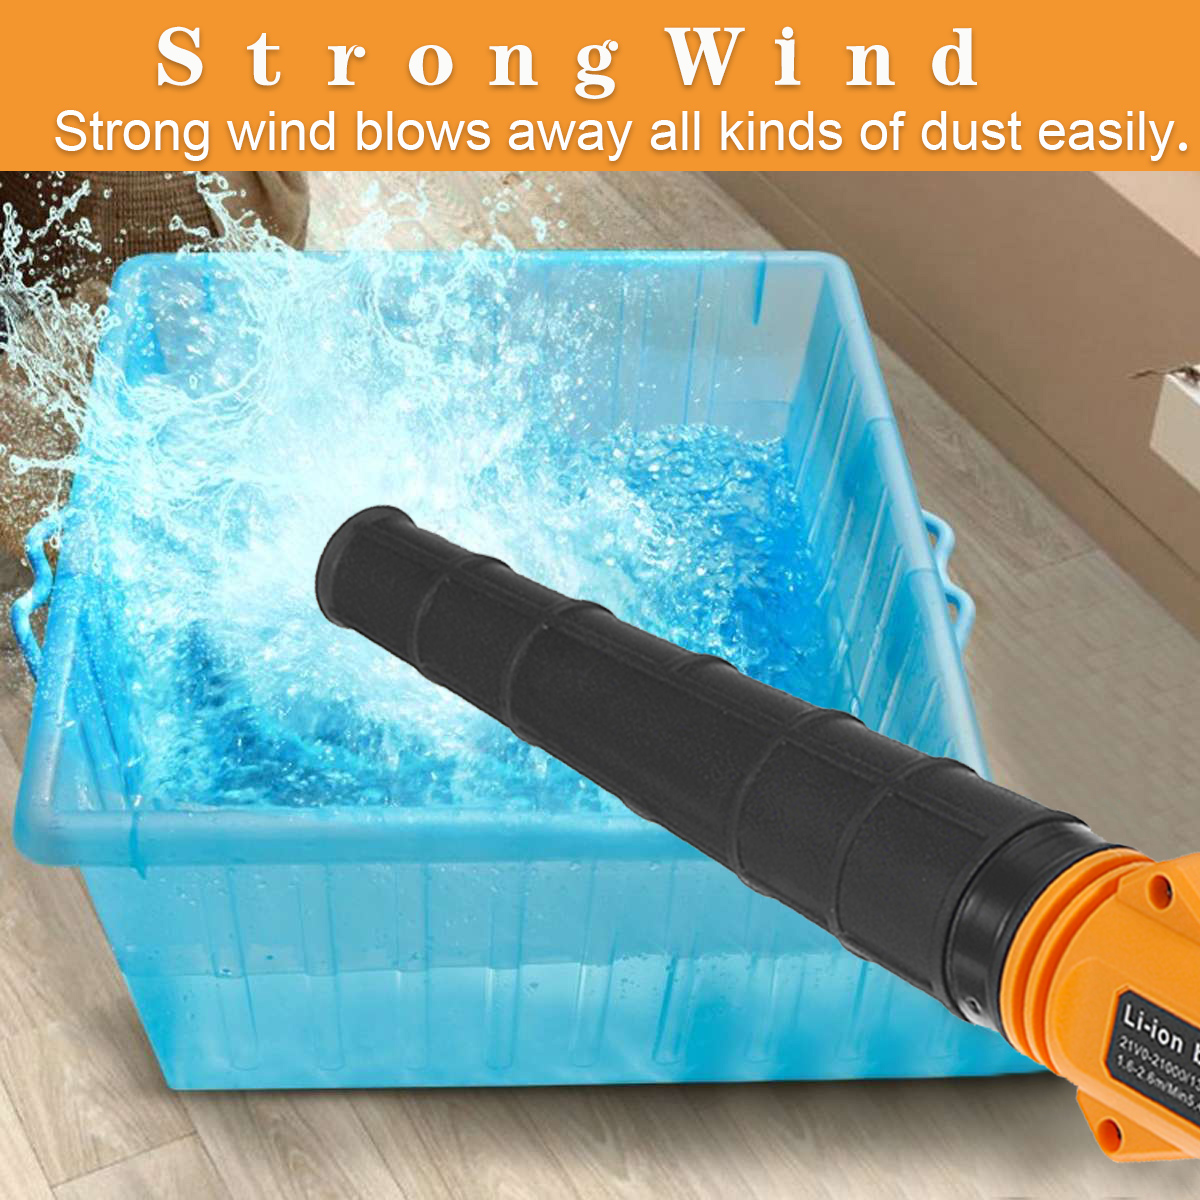 2-in-1-Cordless-Electric-Air-Blower--Suction-Dust-Remover-Leaf-Cleaner-for-Makita-18V-Battery-1856709-5